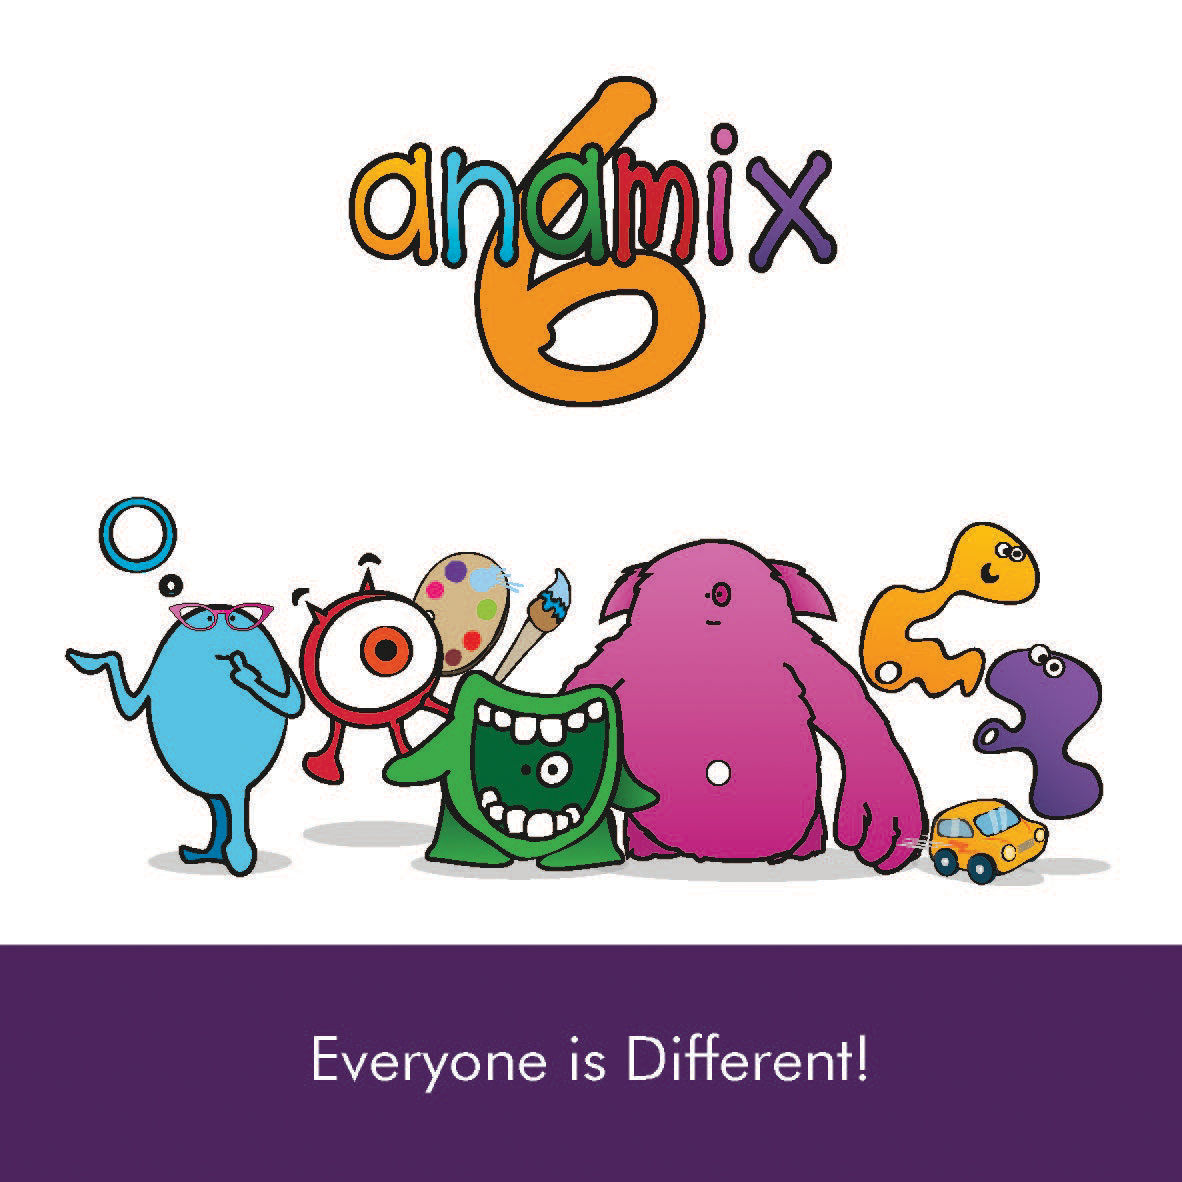 Anamix 6 our books